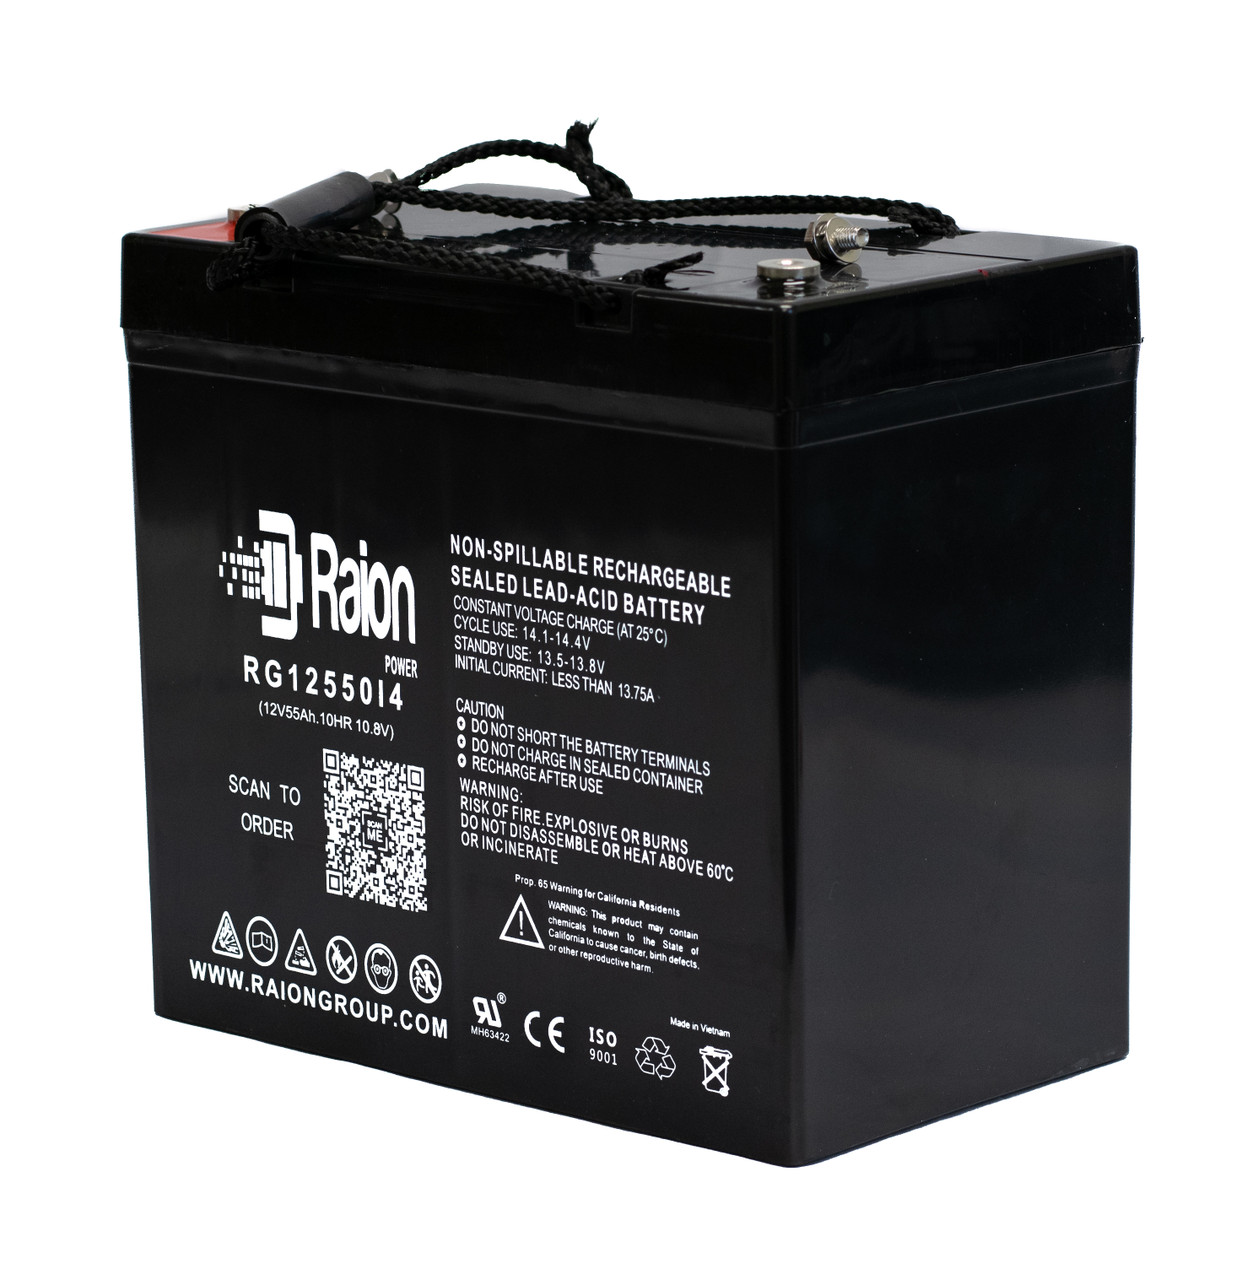 Raion Power 12V 55Ah 22NF Mobility Scooter Battery Replacement for Merits Health Products MP1IU